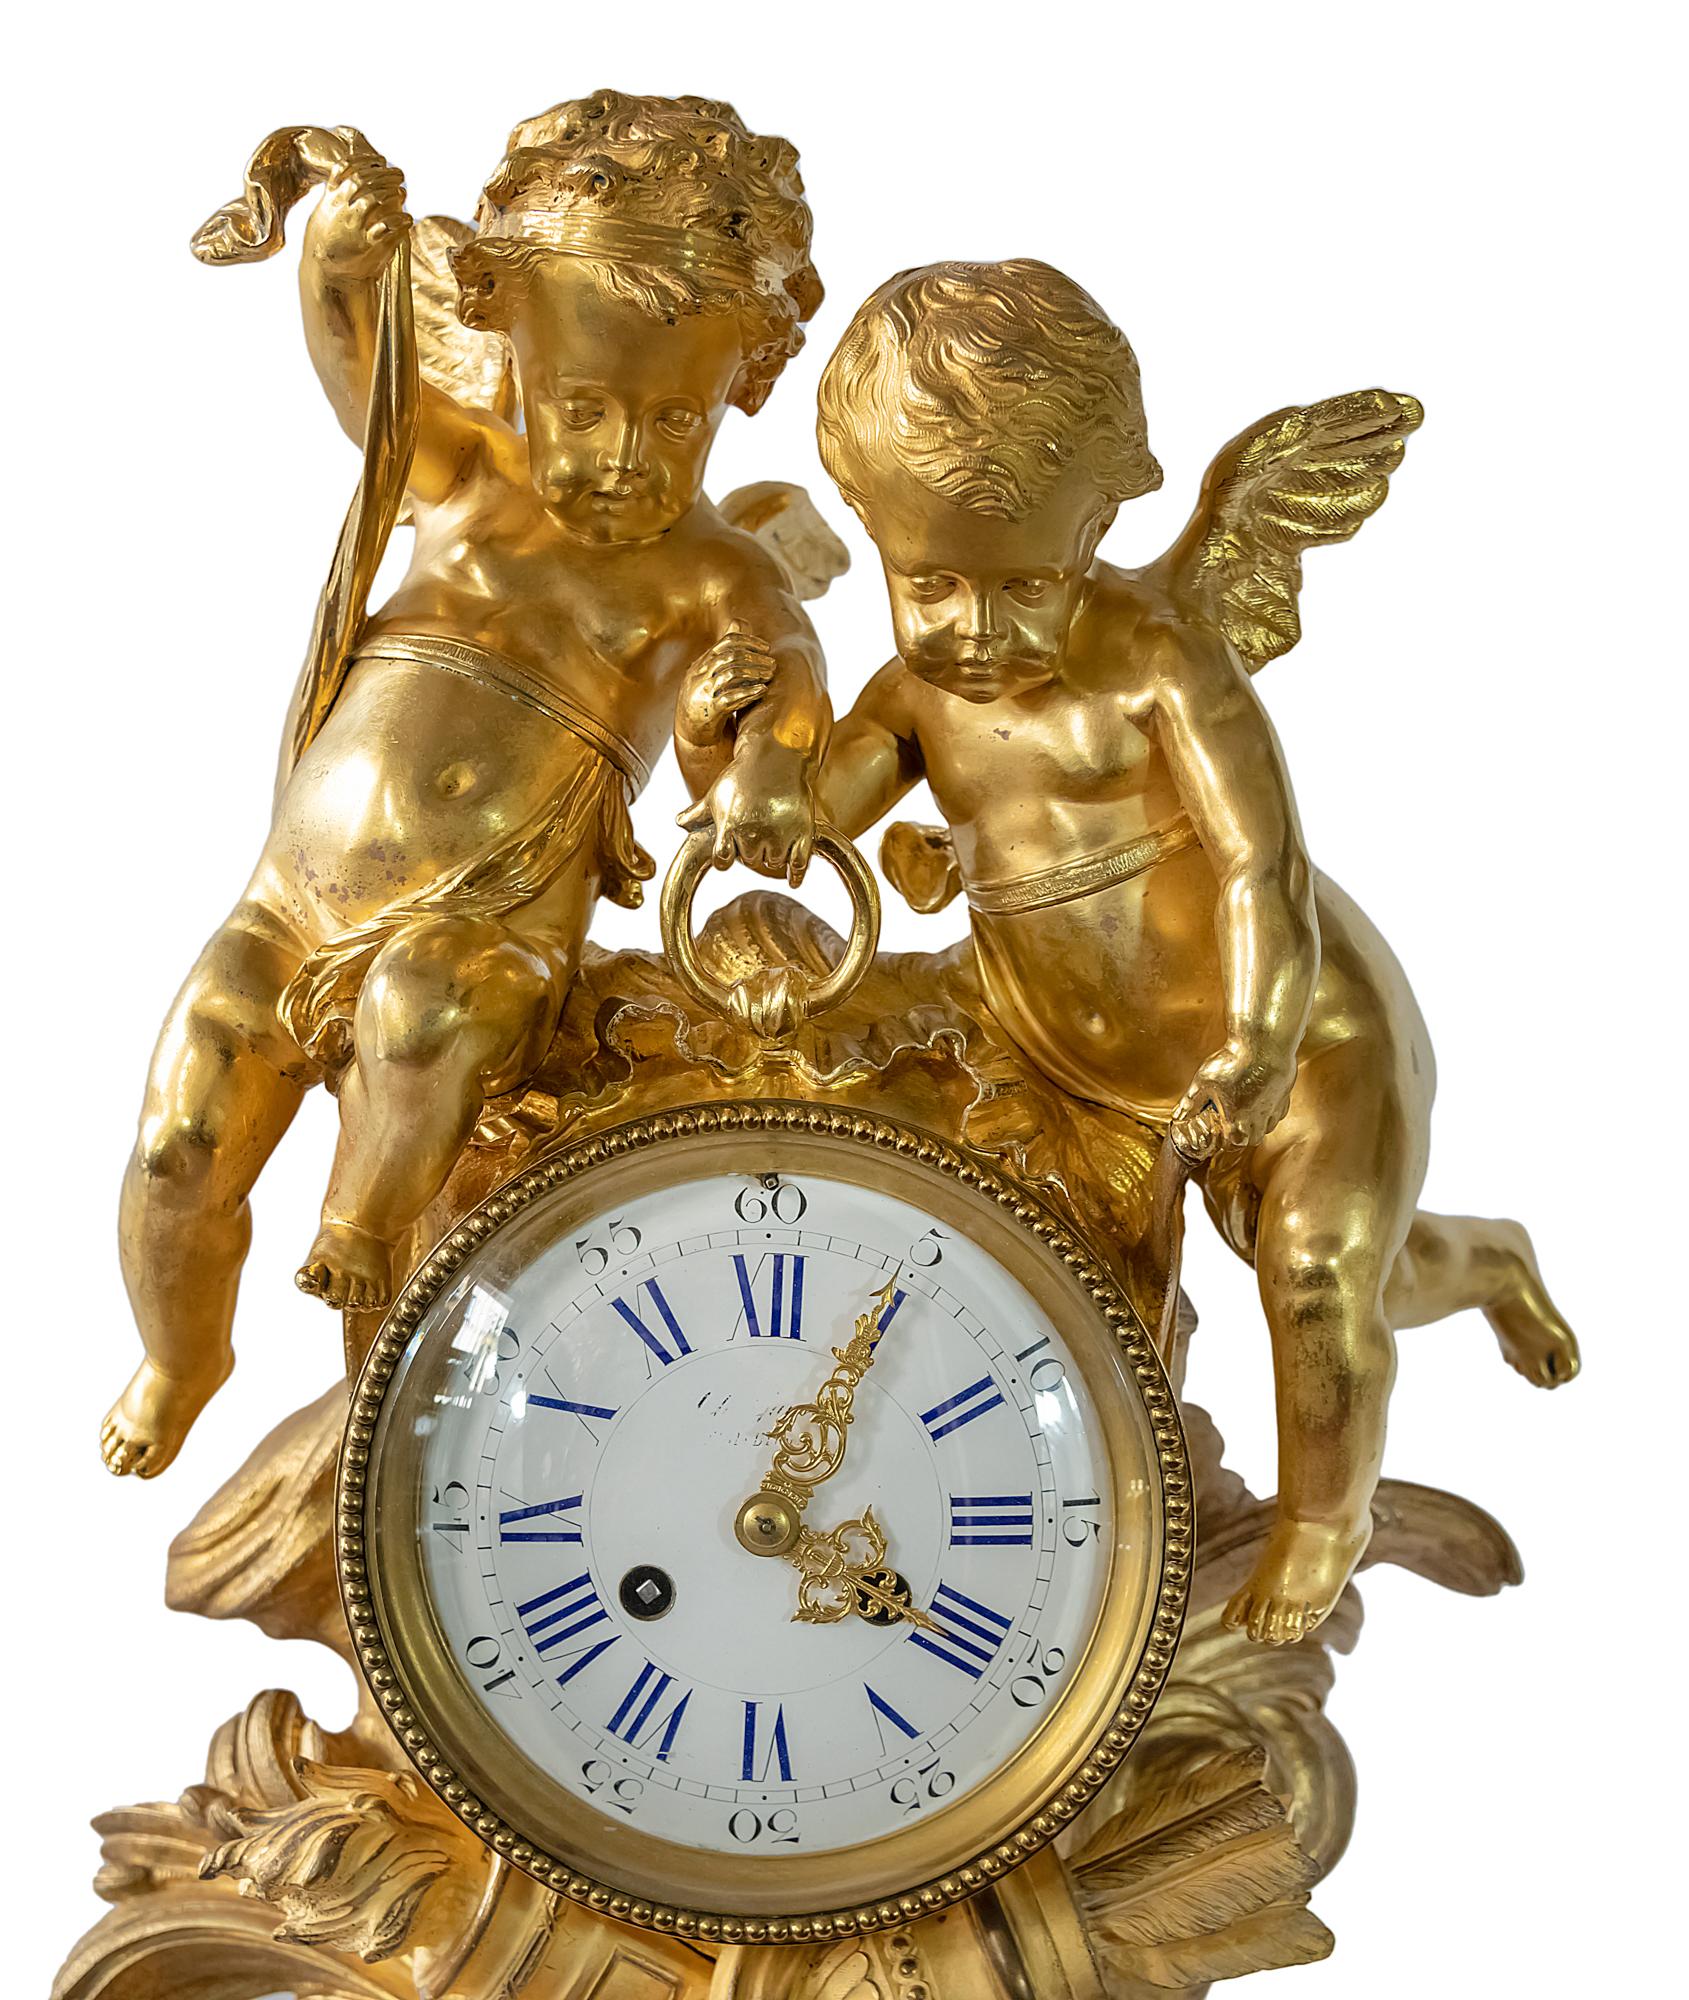 Large antique 19th century French gilded bronze mantel clock surmounted with two angels holding the dial.
The enamel dial numerals are hand painted in cobalt blue color.
Marked and numbered inside the clock movement.
Weight: 19 kg.
Date of